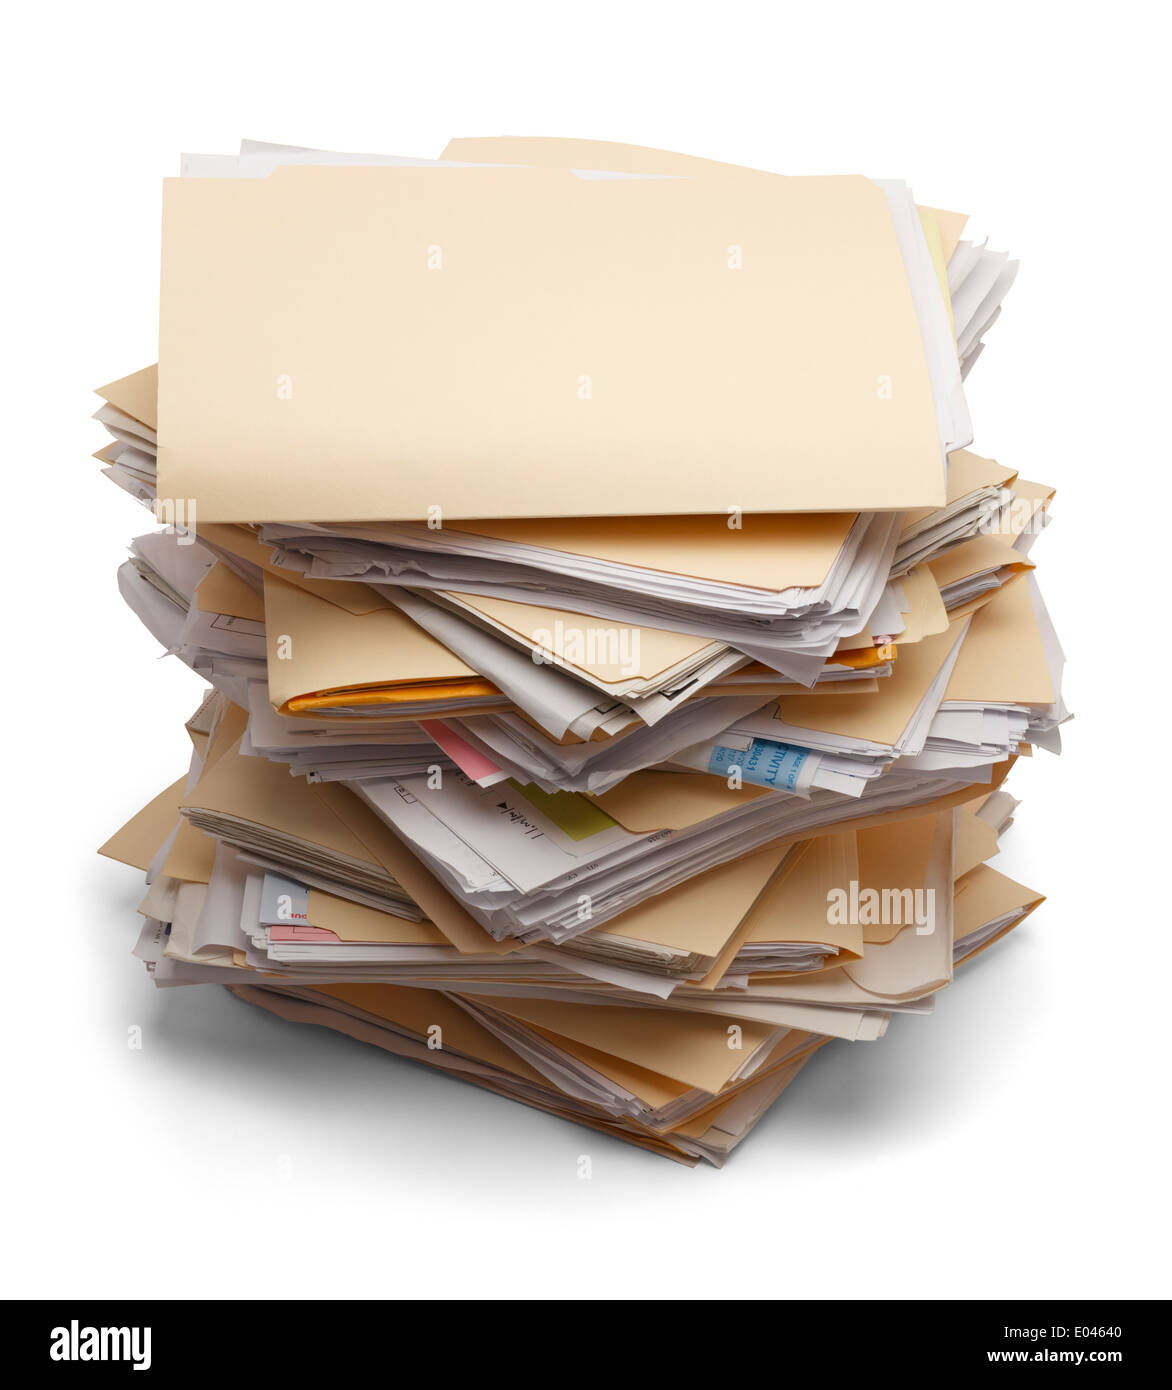 Files stacking up in a messy order isolated on white background. Stock Photo